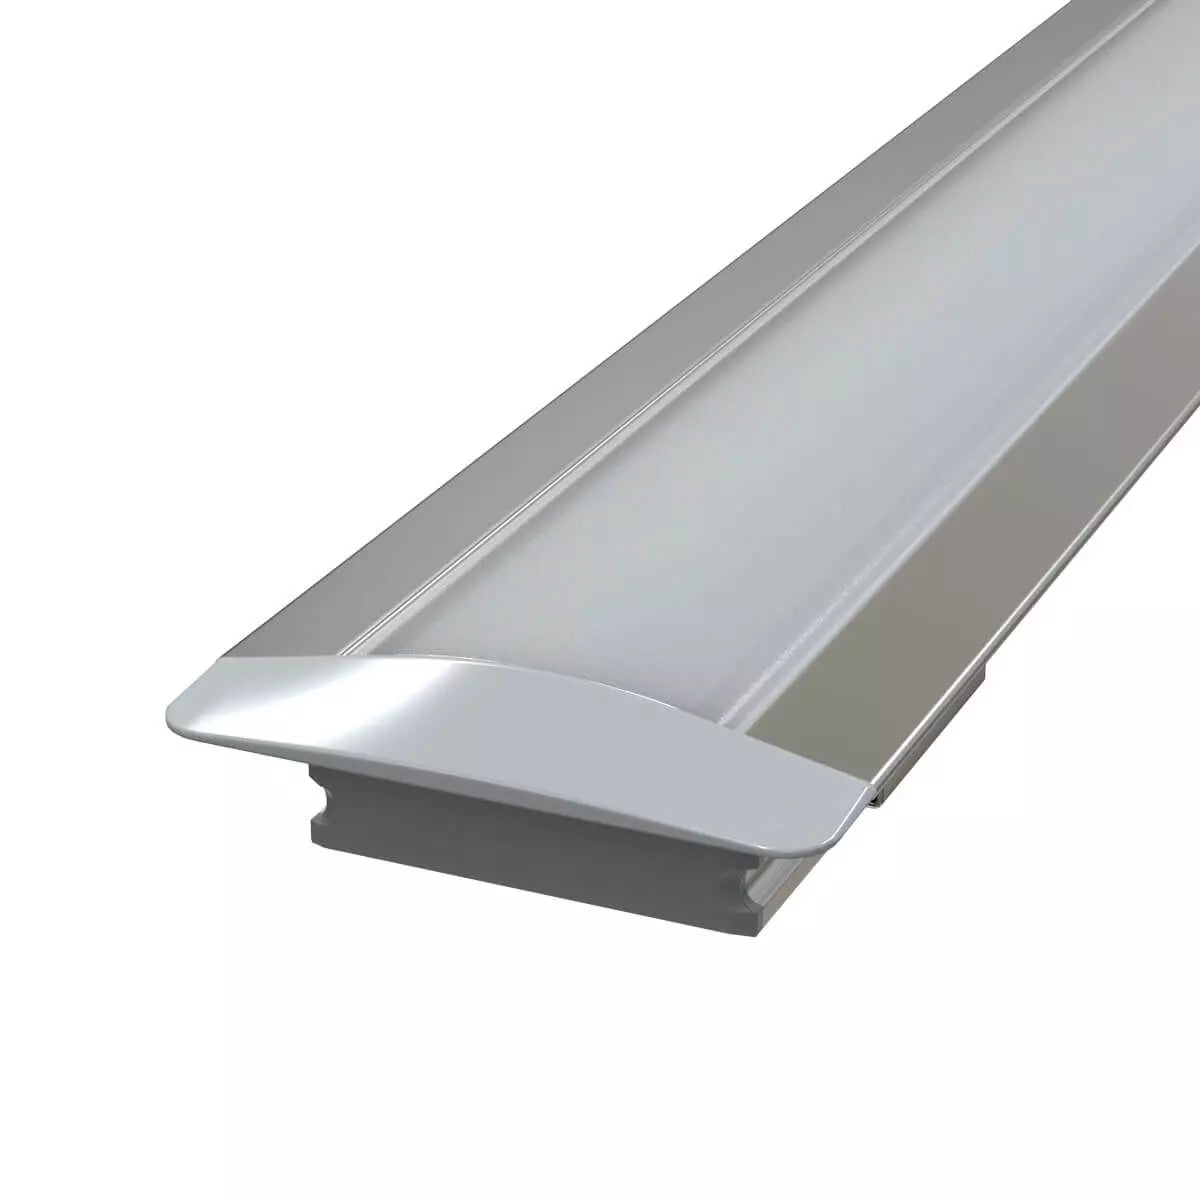 View Recessed LED Profile 7mm Deep LED Supplier information